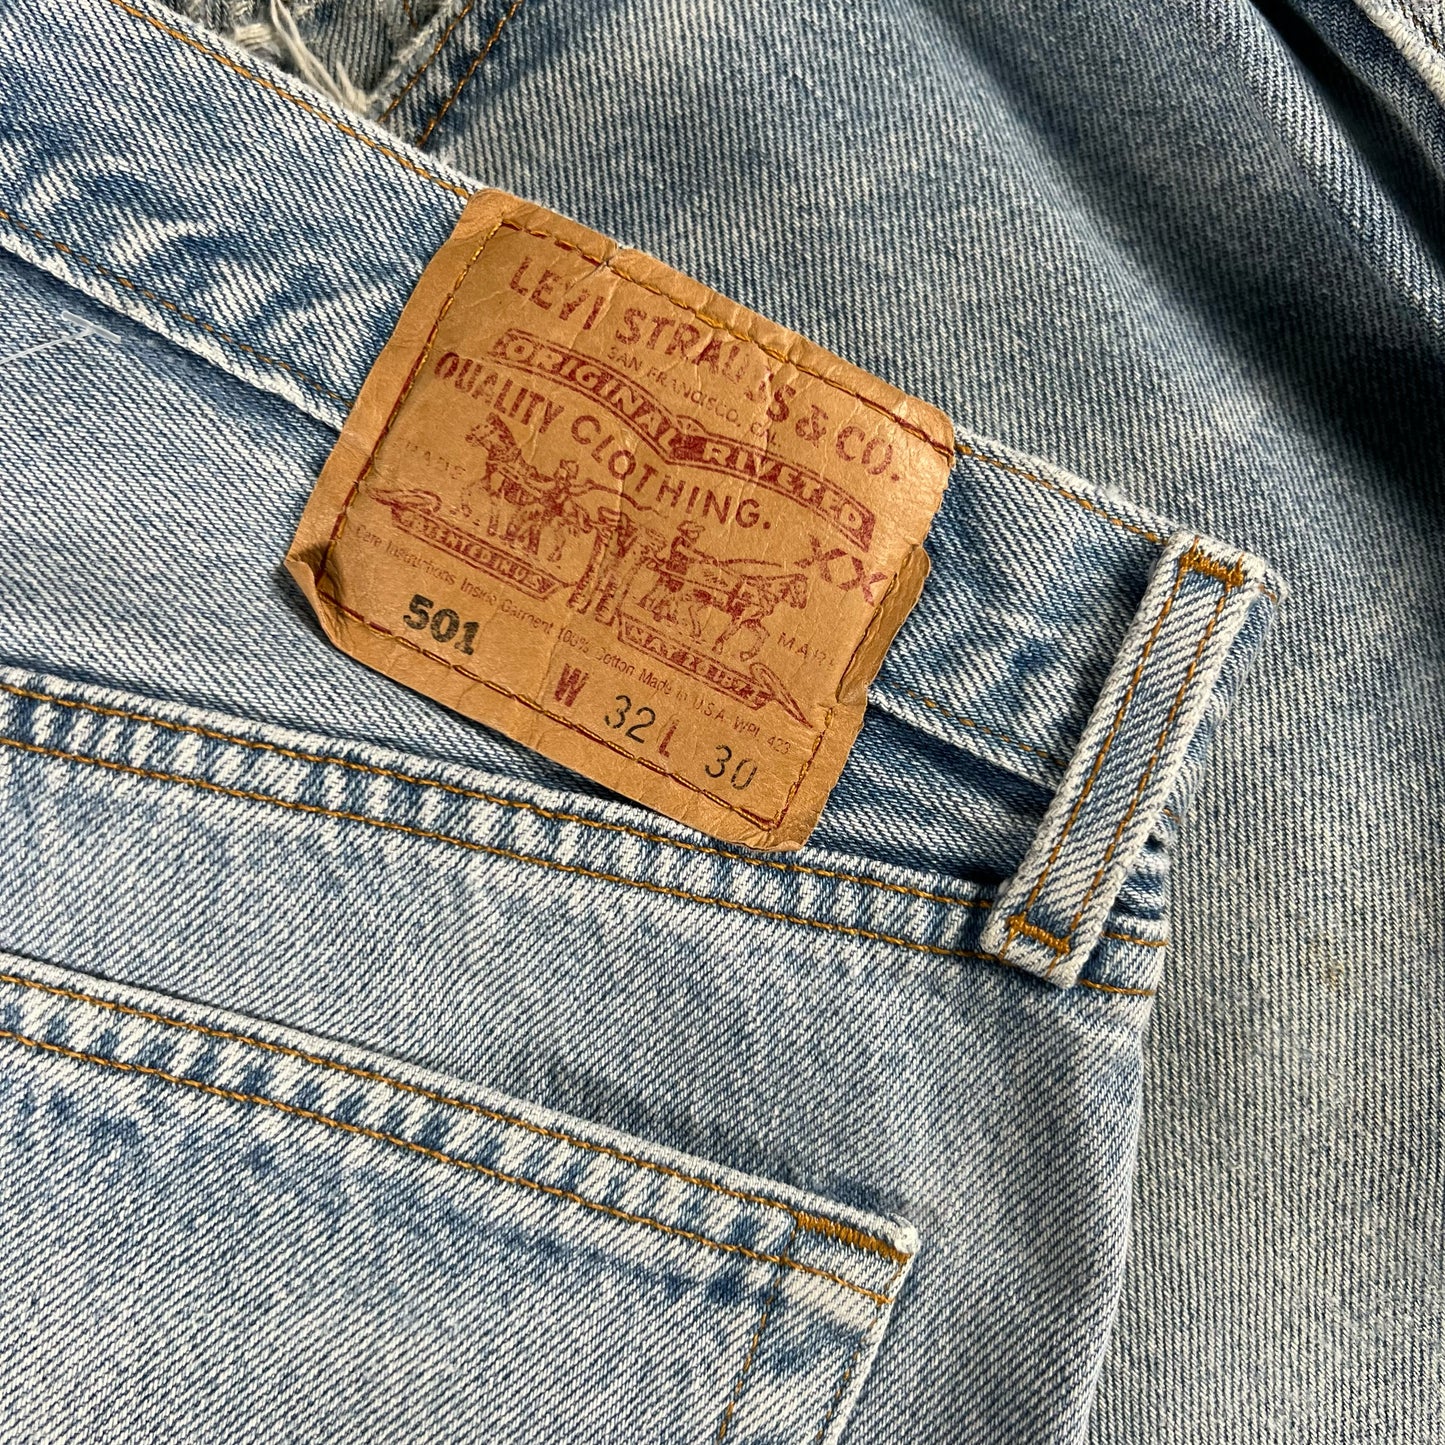 90s Levi's 501/505 2 Pack-(31x30)